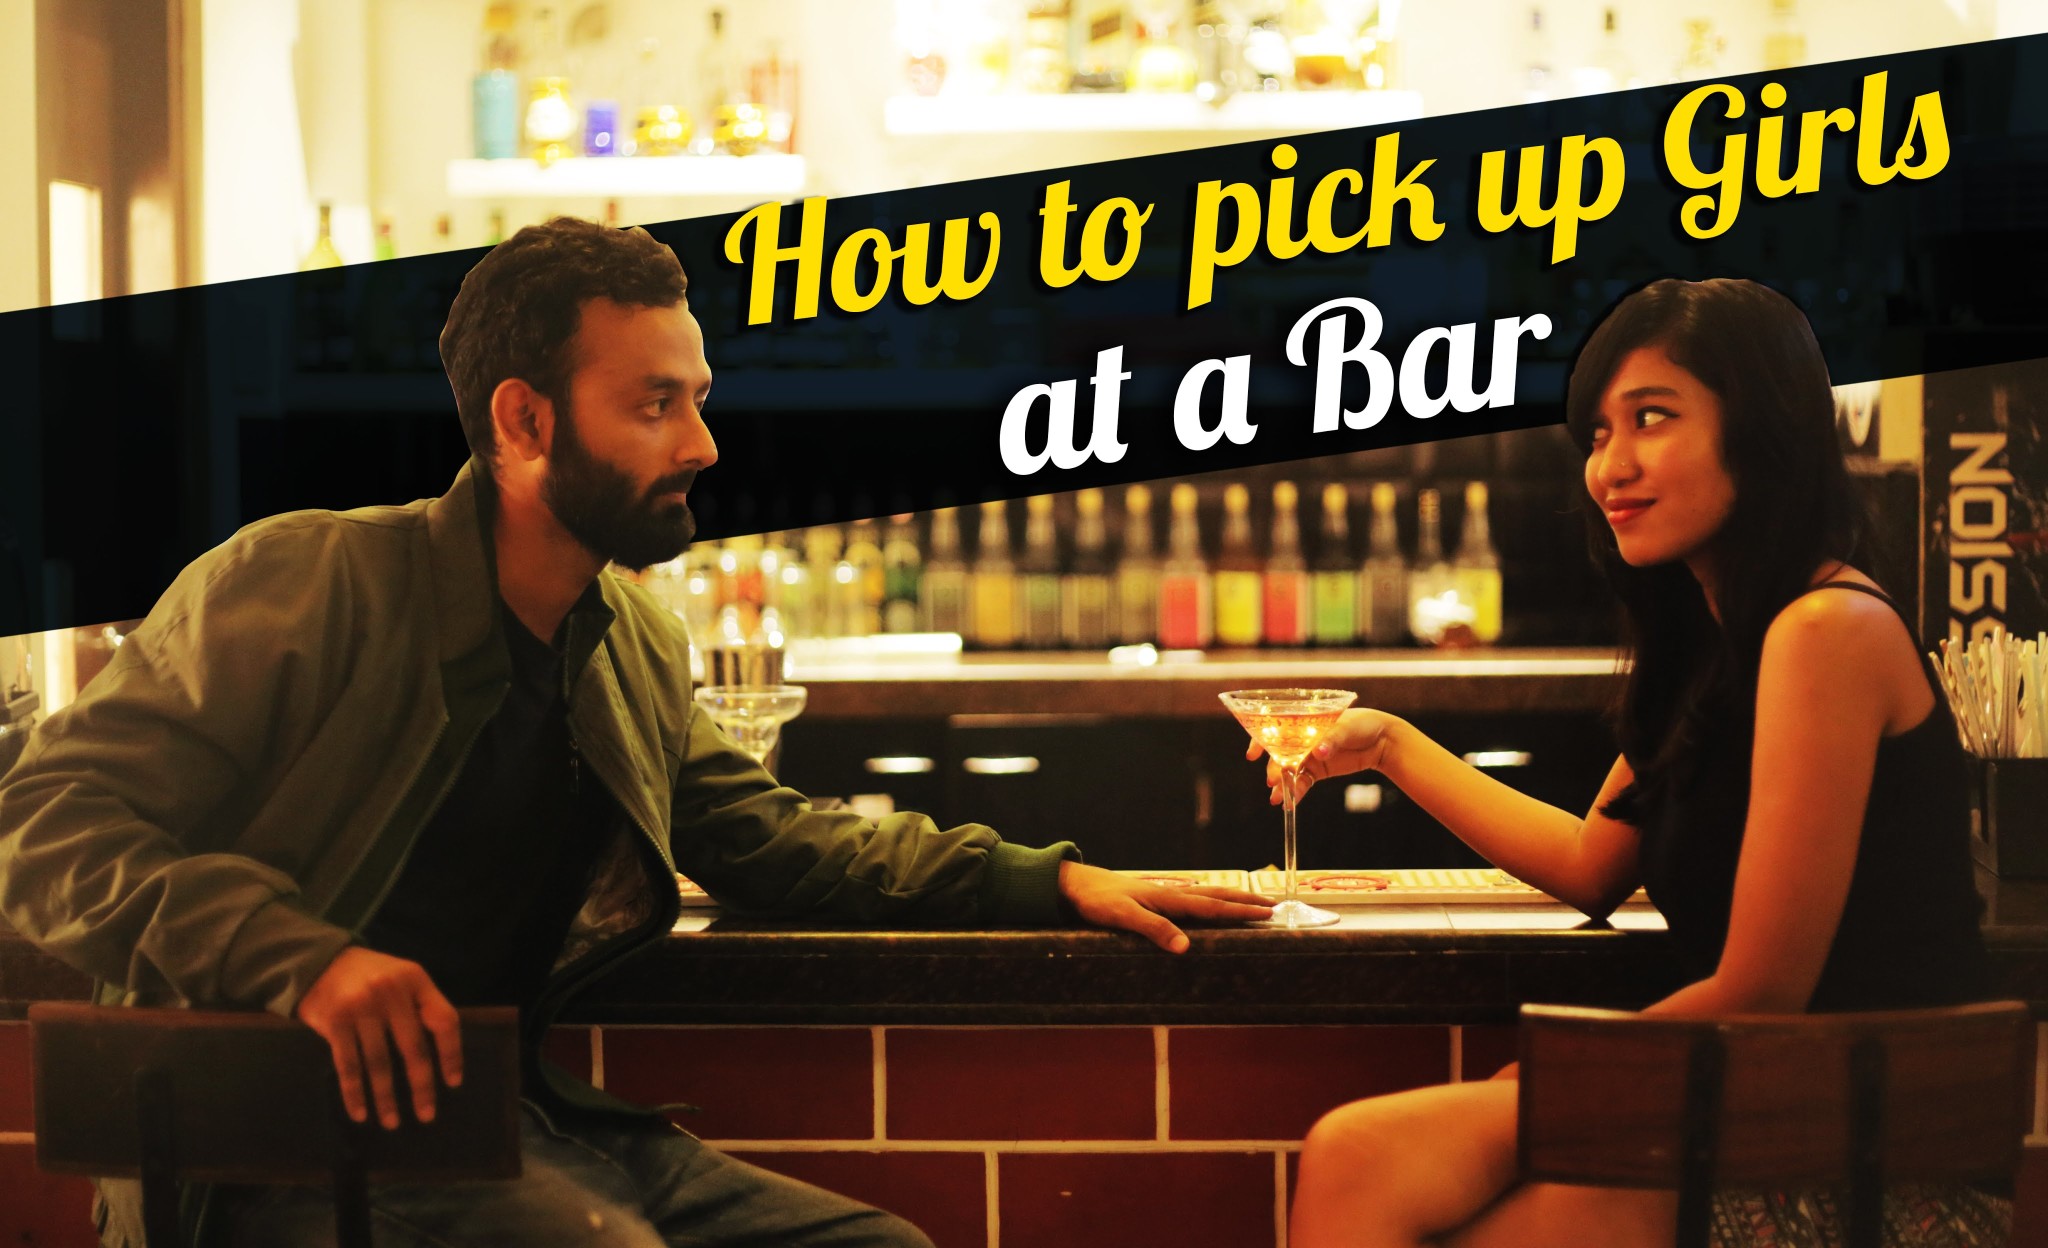 Watch This Amazing Video To Learn How To Pick Up Girls In A Bar LifeCrust